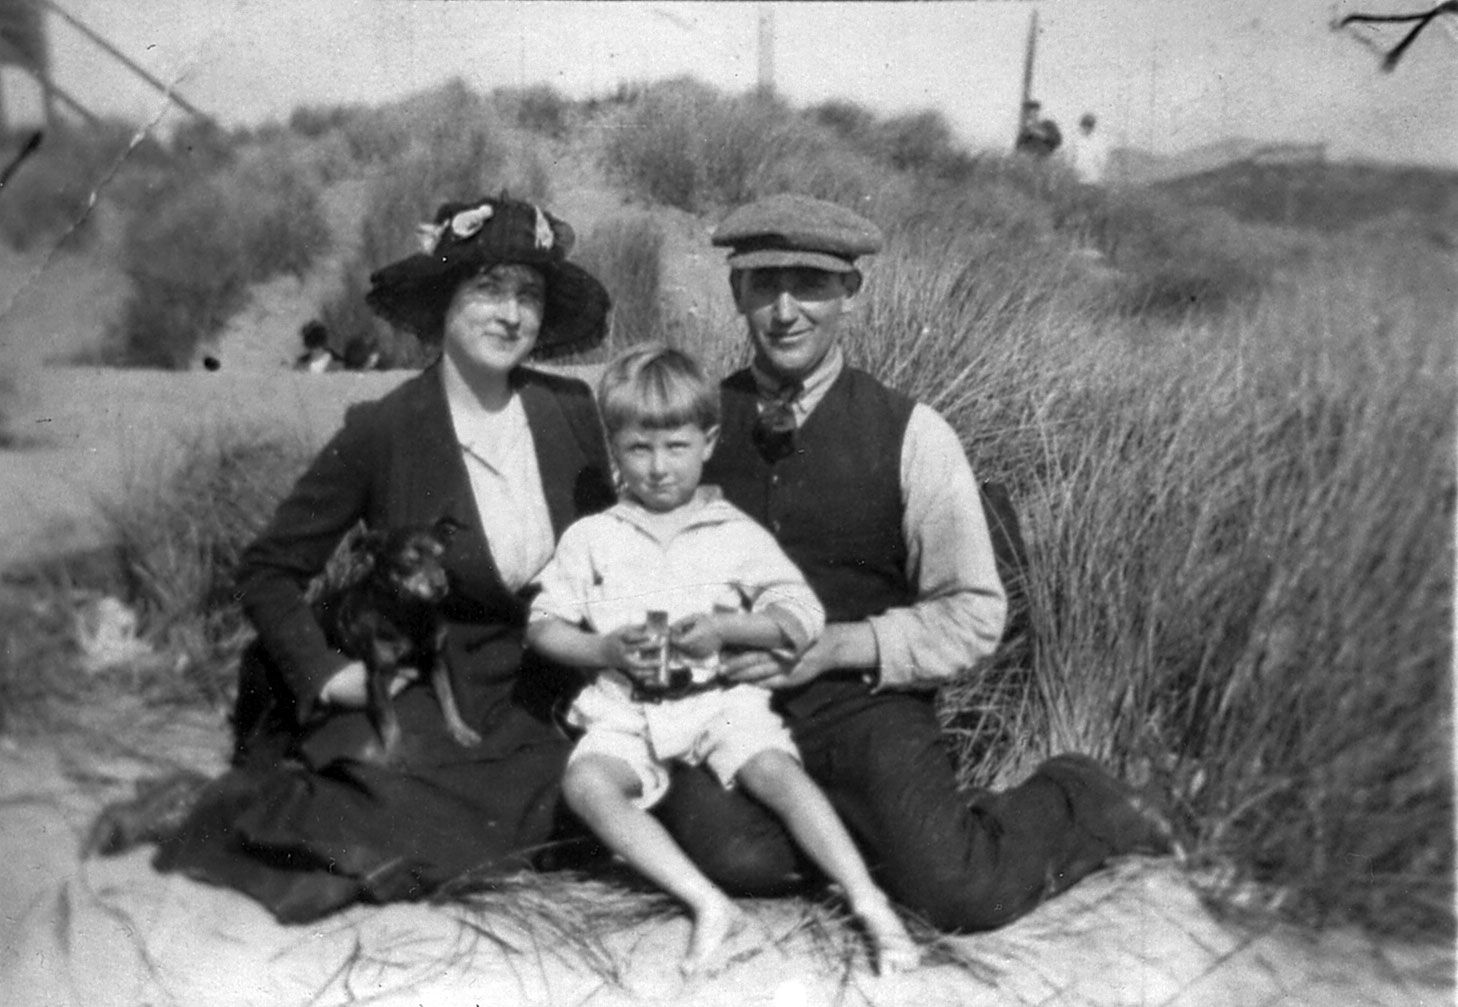 Photograph of family at beach